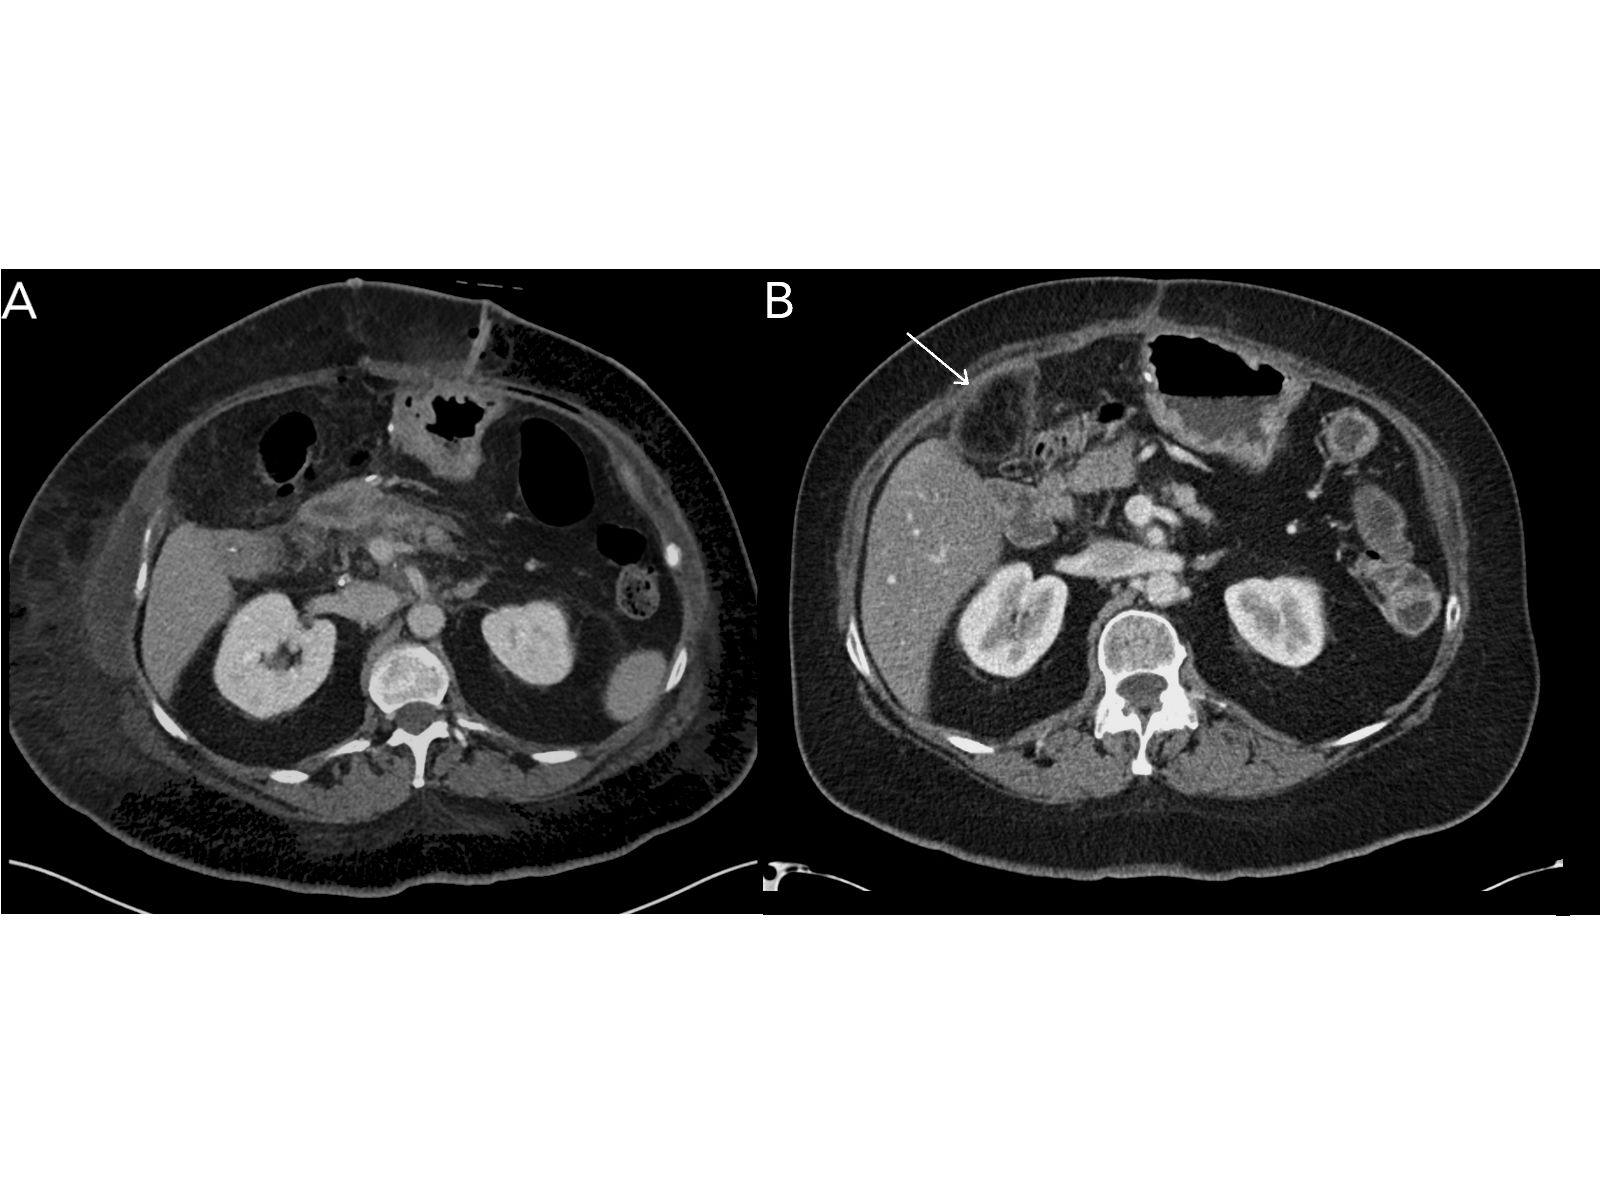 Diagnose the Mystery Structure in This Patient's CT Scans